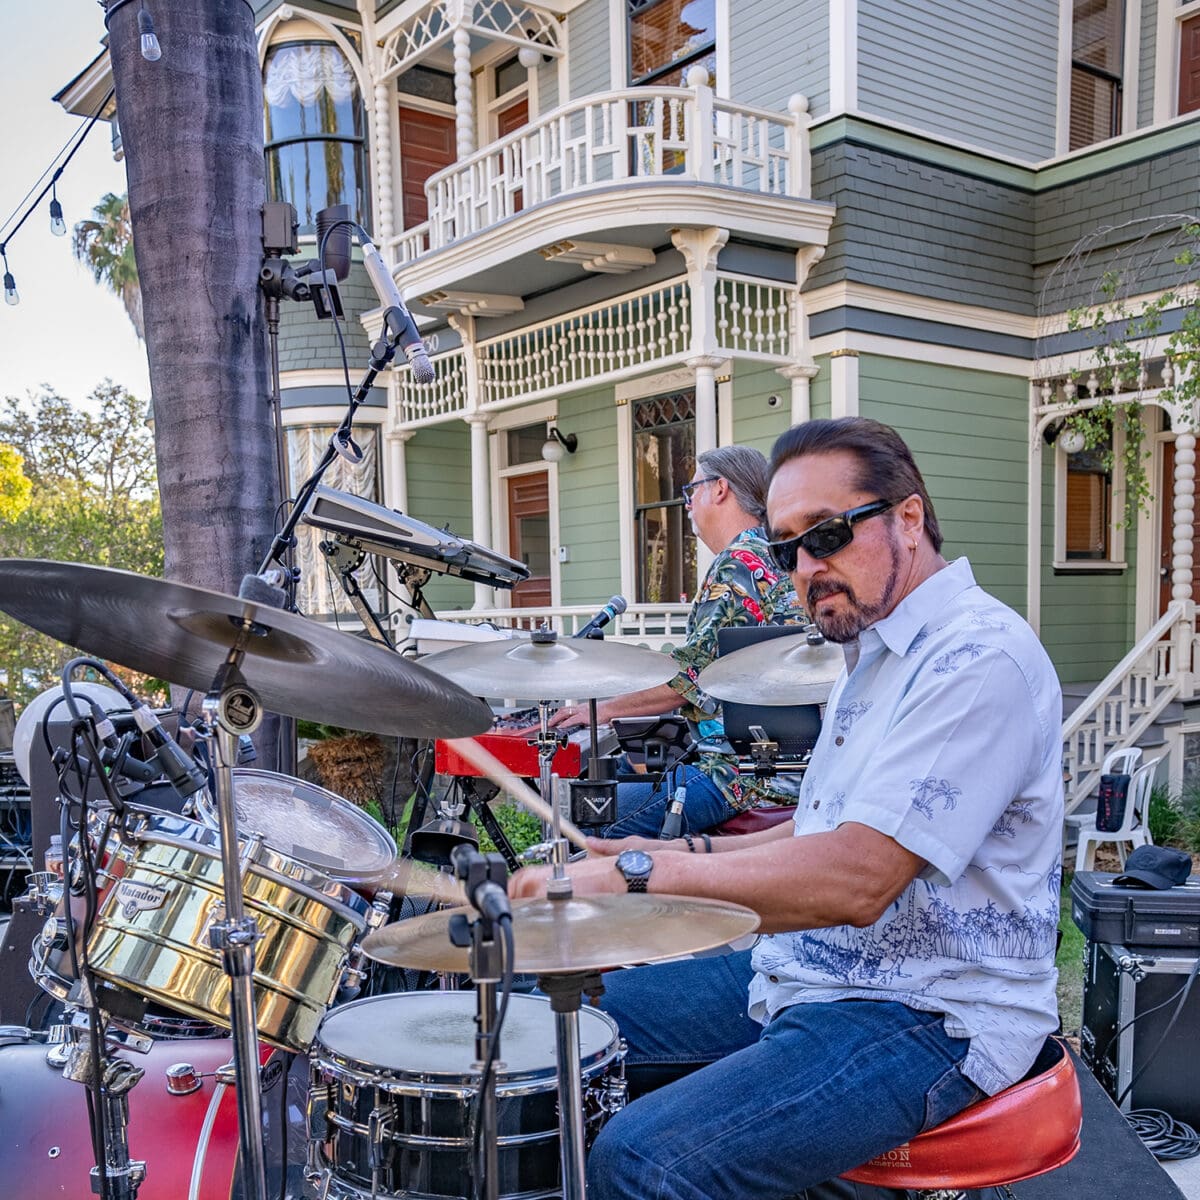 Two male drummers playing kits during an outdoor performance at Heritage Square in front of a Victorian house.